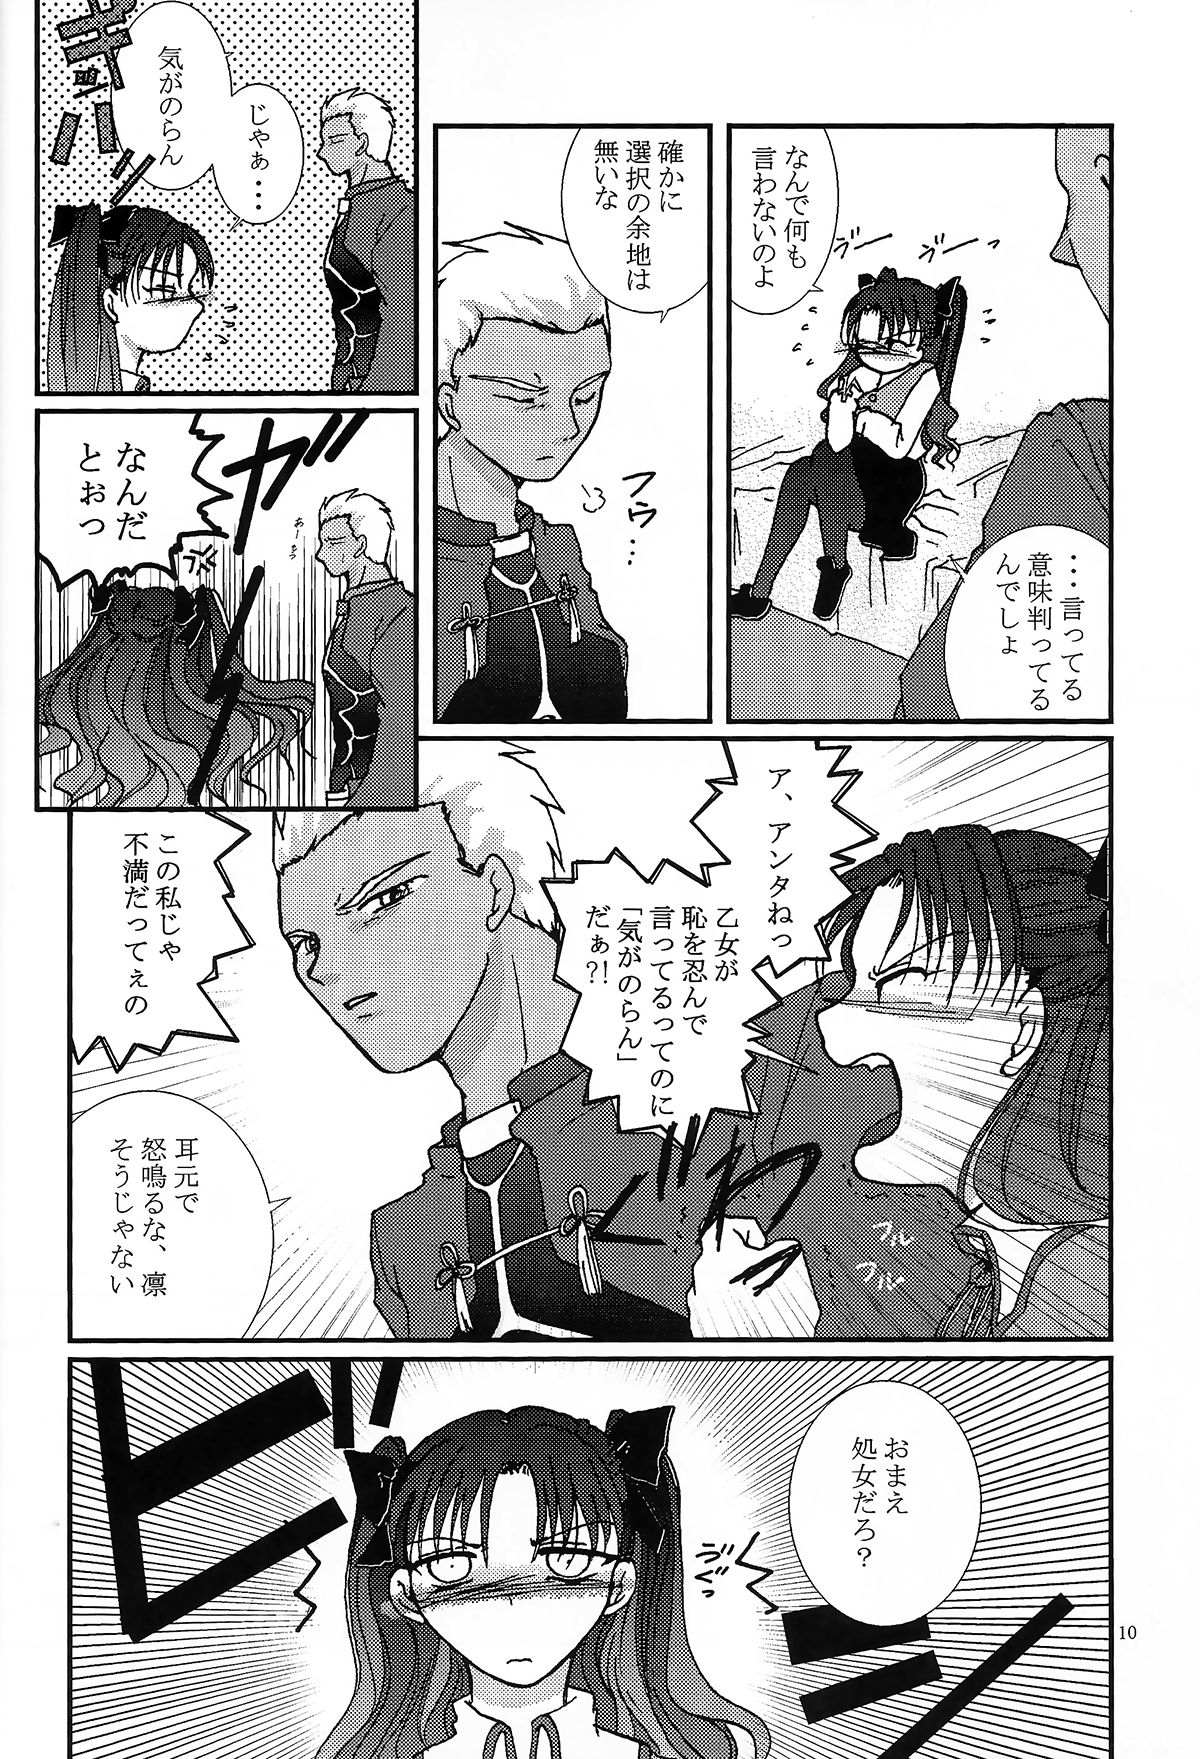 (SC24) [Takeda Syouten (Takeda Sora)] Question-7 (Fate/stay night) page 8 full